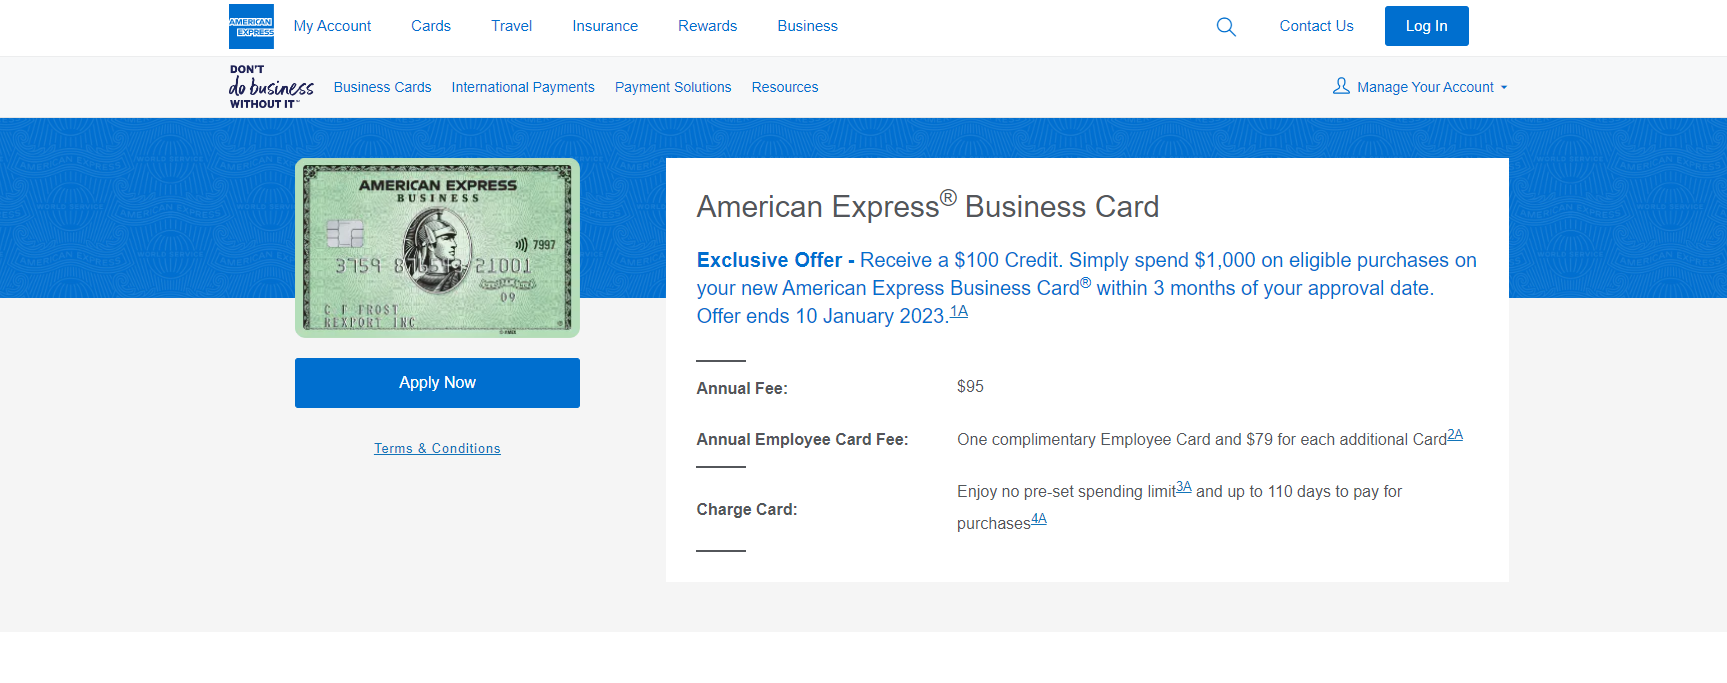 Receive a $100 Credit with new American Express Business Card on eligible purchases